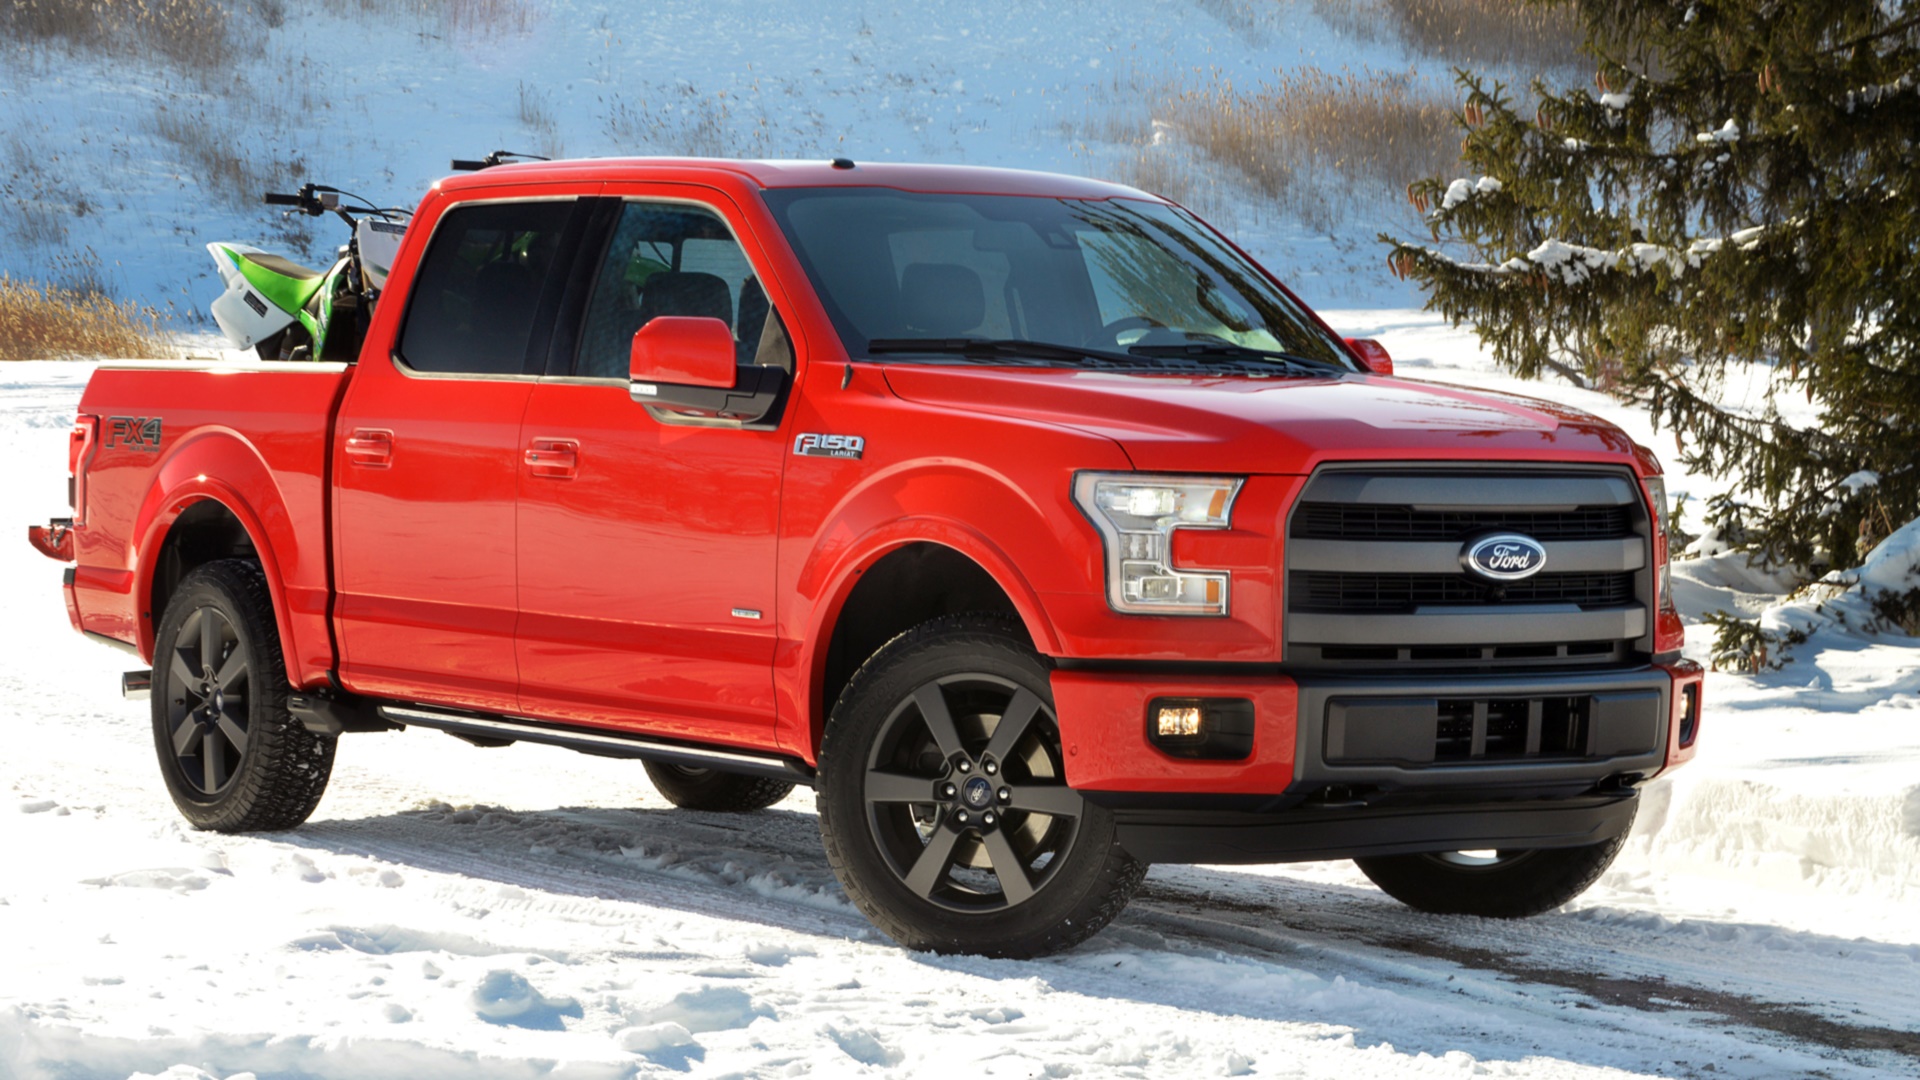 Vehicles 2015 Ford F-150 HD Wallpaper | Background Image